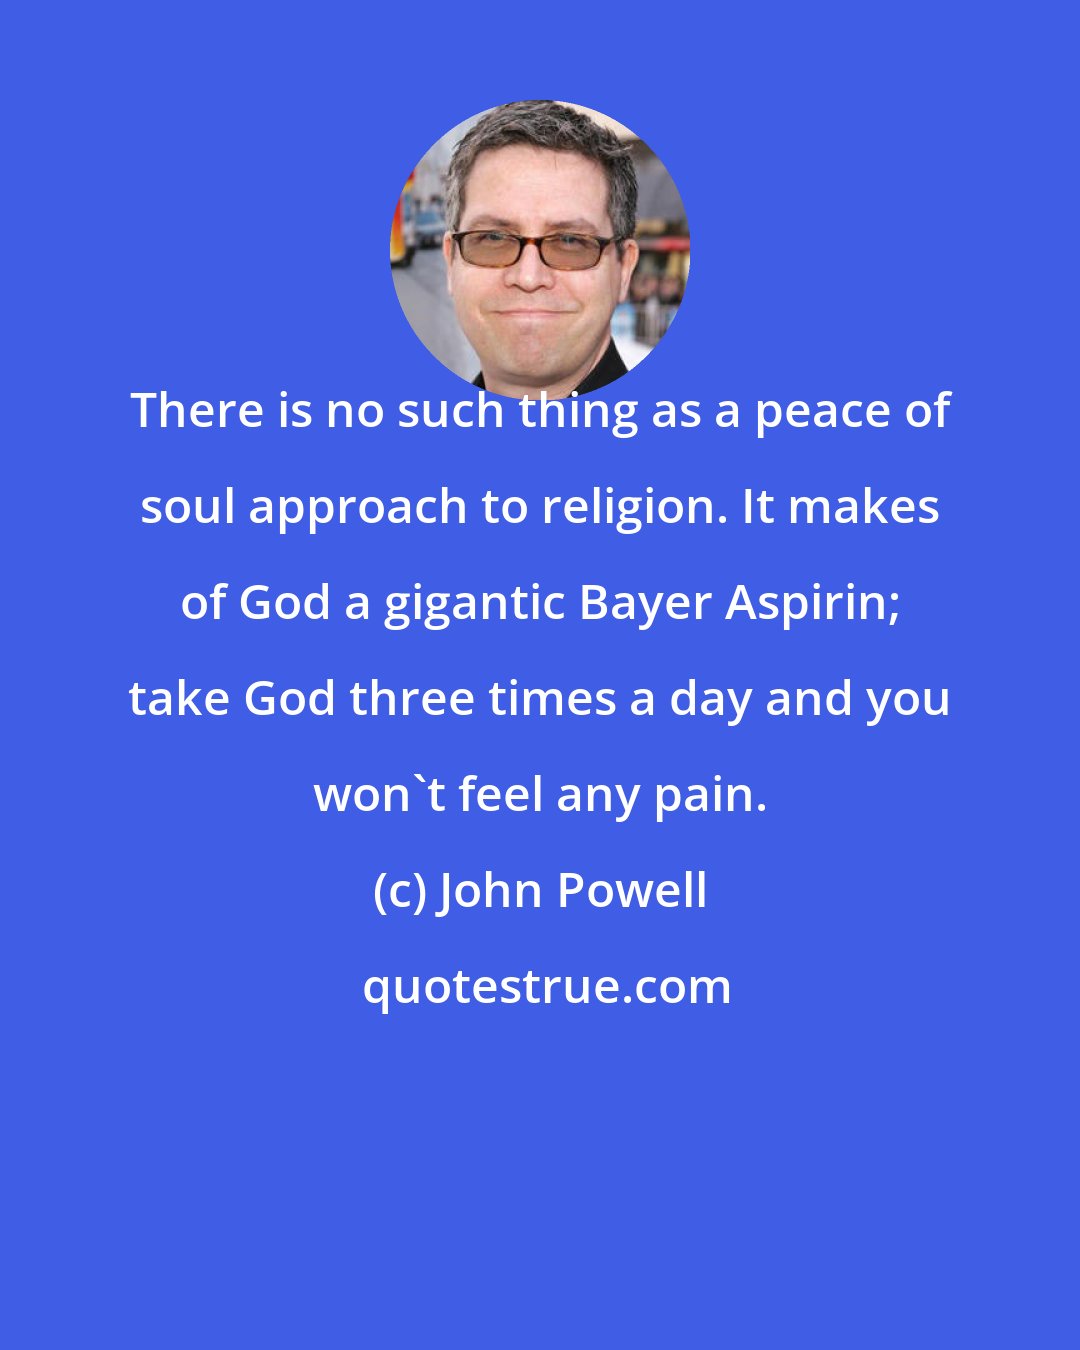 John Powell: There is no such thing as a peace of soul approach to religion. It makes of God a gigantic Bayer Aspirin; take God three times a day and you won't feel any pain.